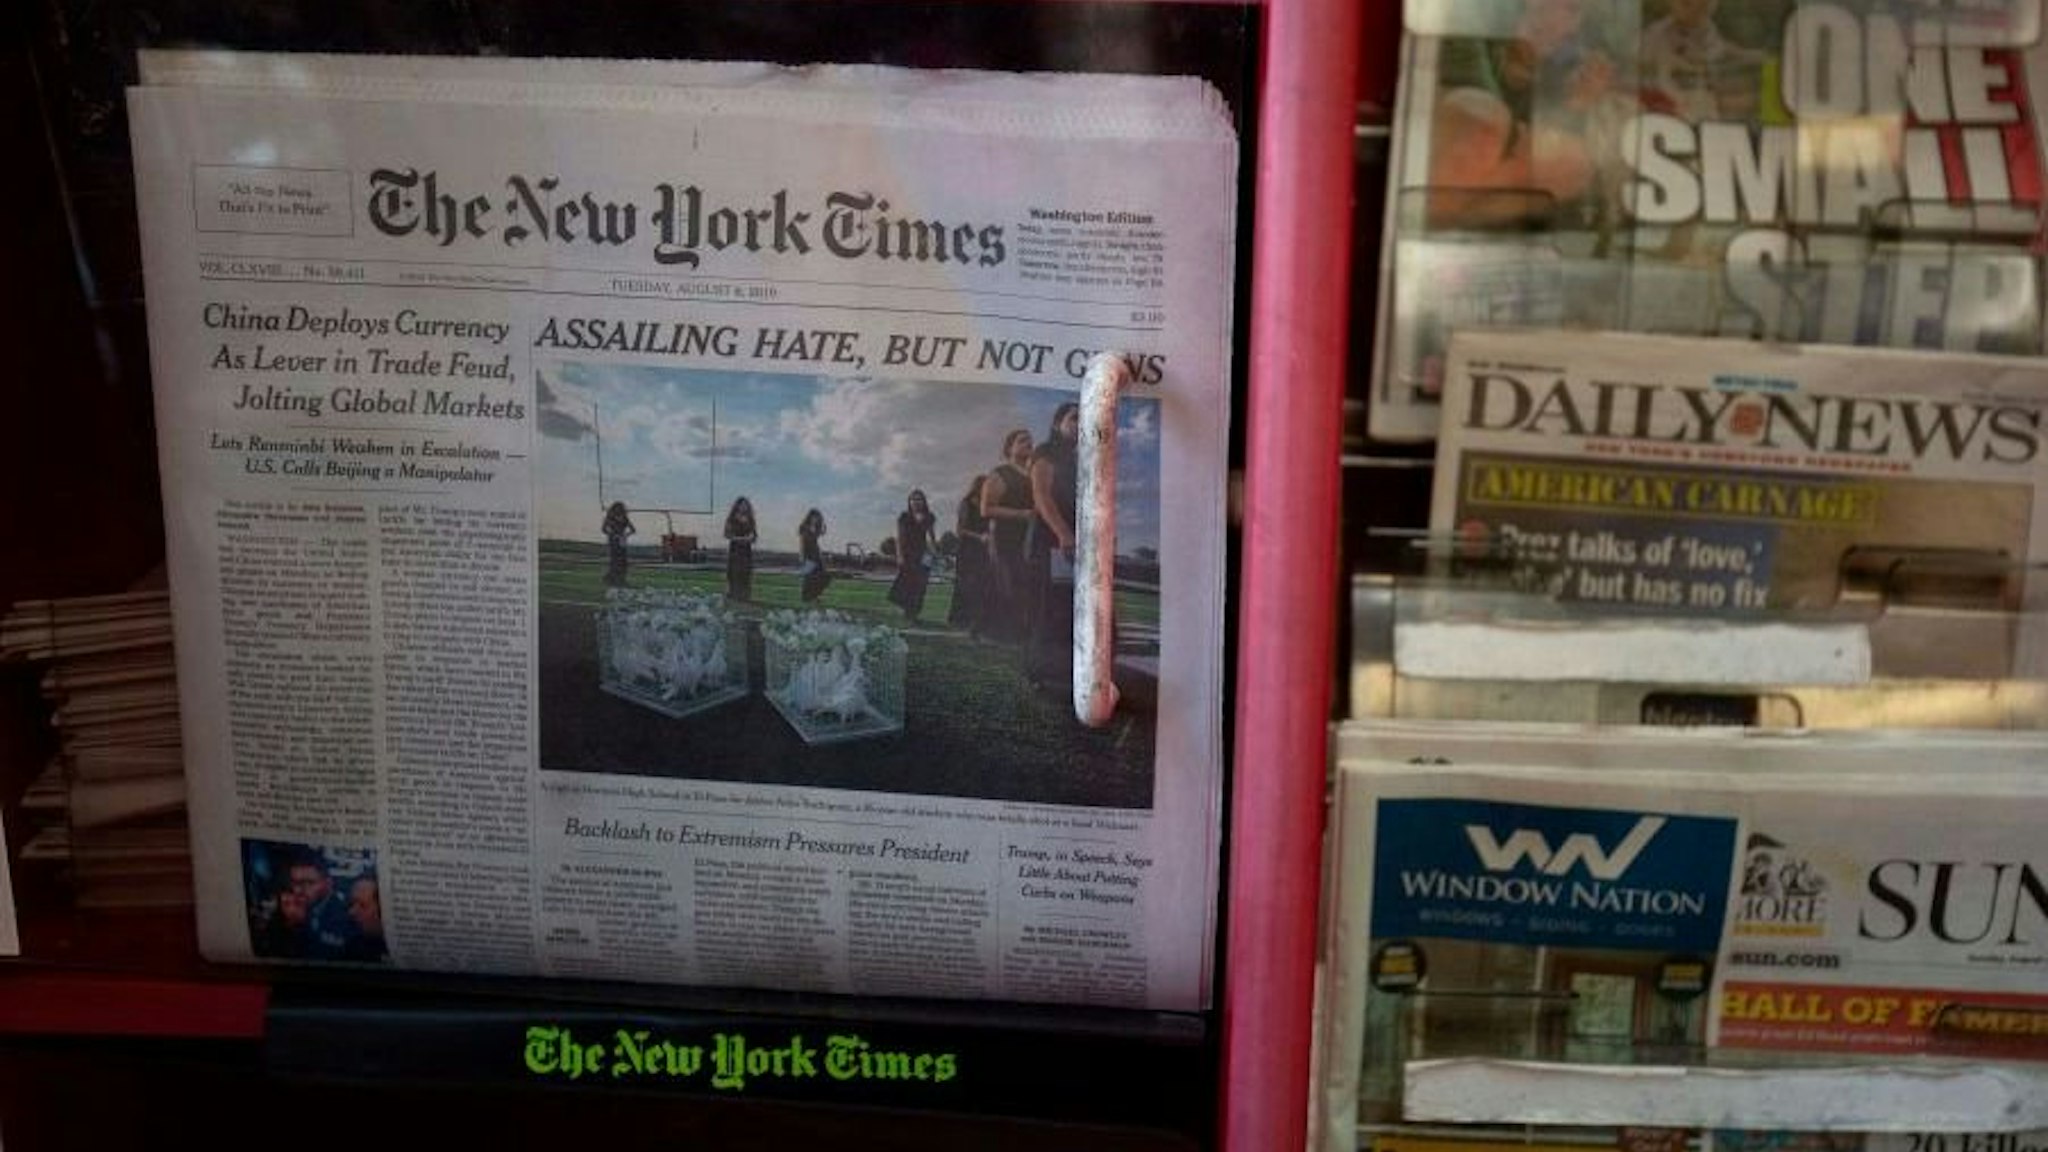 The front pages of The New York Times, New York Post, New York Daily News and Baltimore Sun newspapers are seen at a convenience store in Washington, DC, on August 6, 2019.